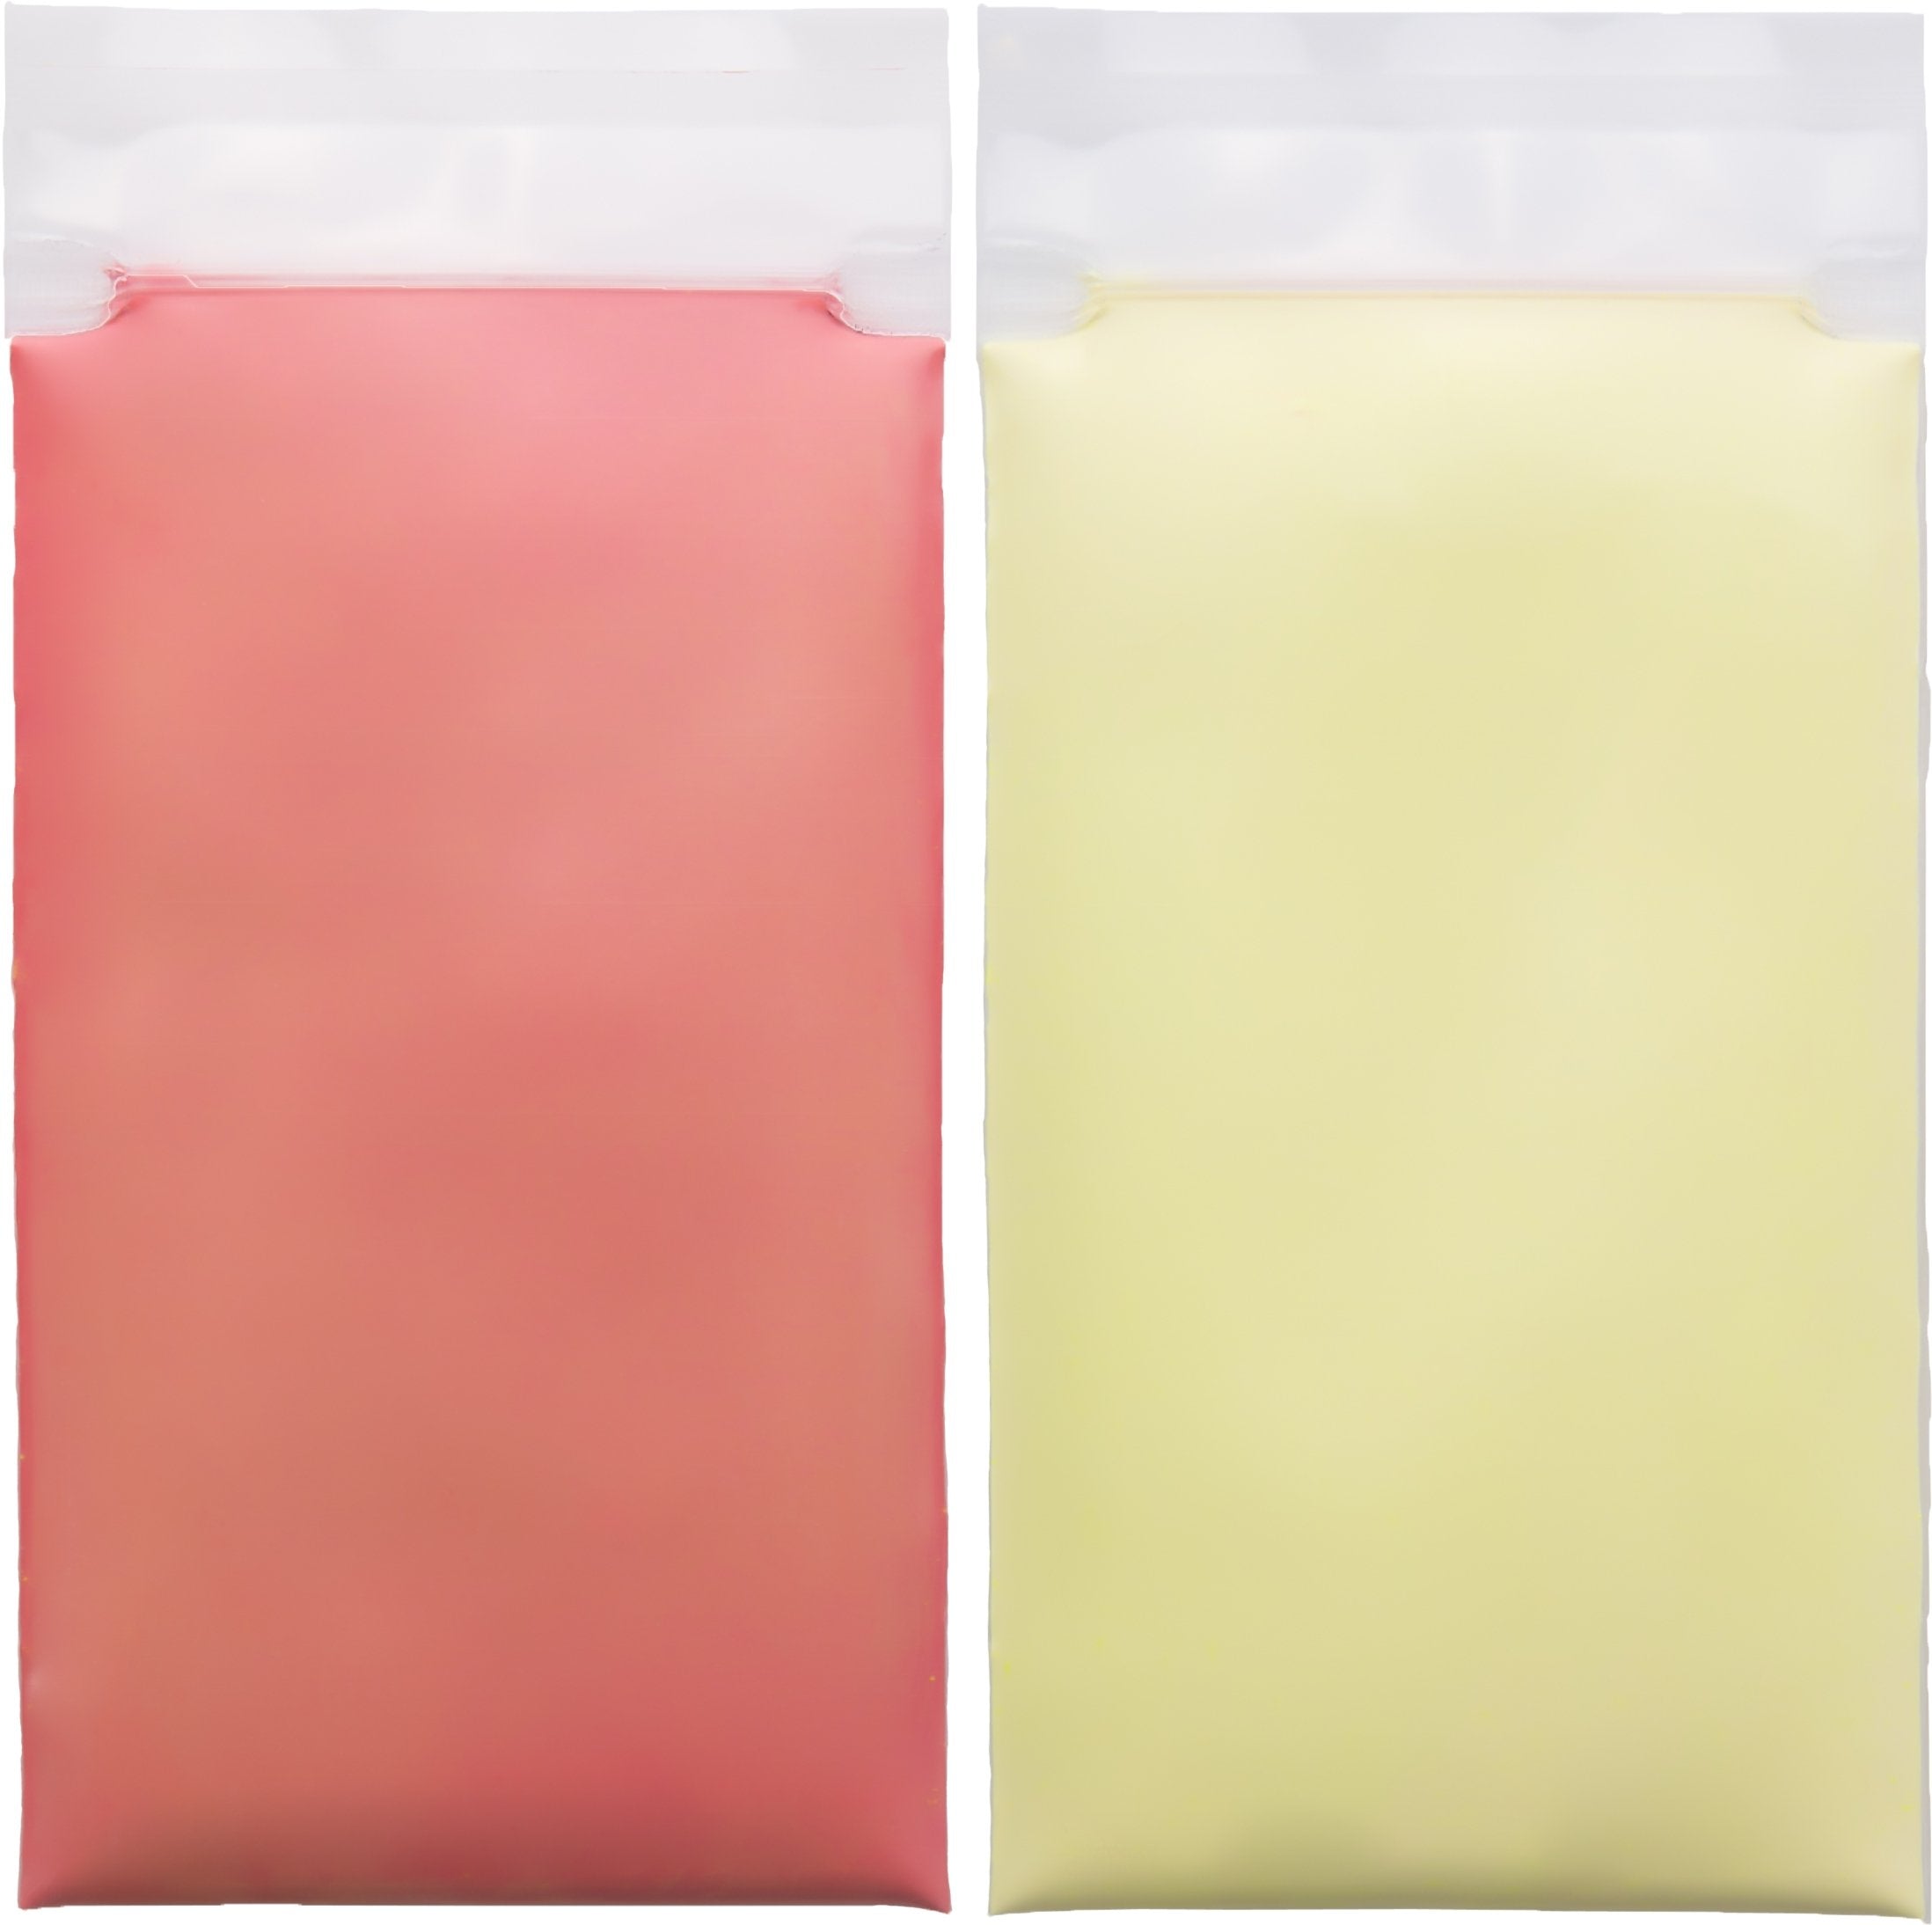 Low Temperature Cold Activated Thermochromic Bi-Color Pigment Yellow  Changing to RED at 59F/15C